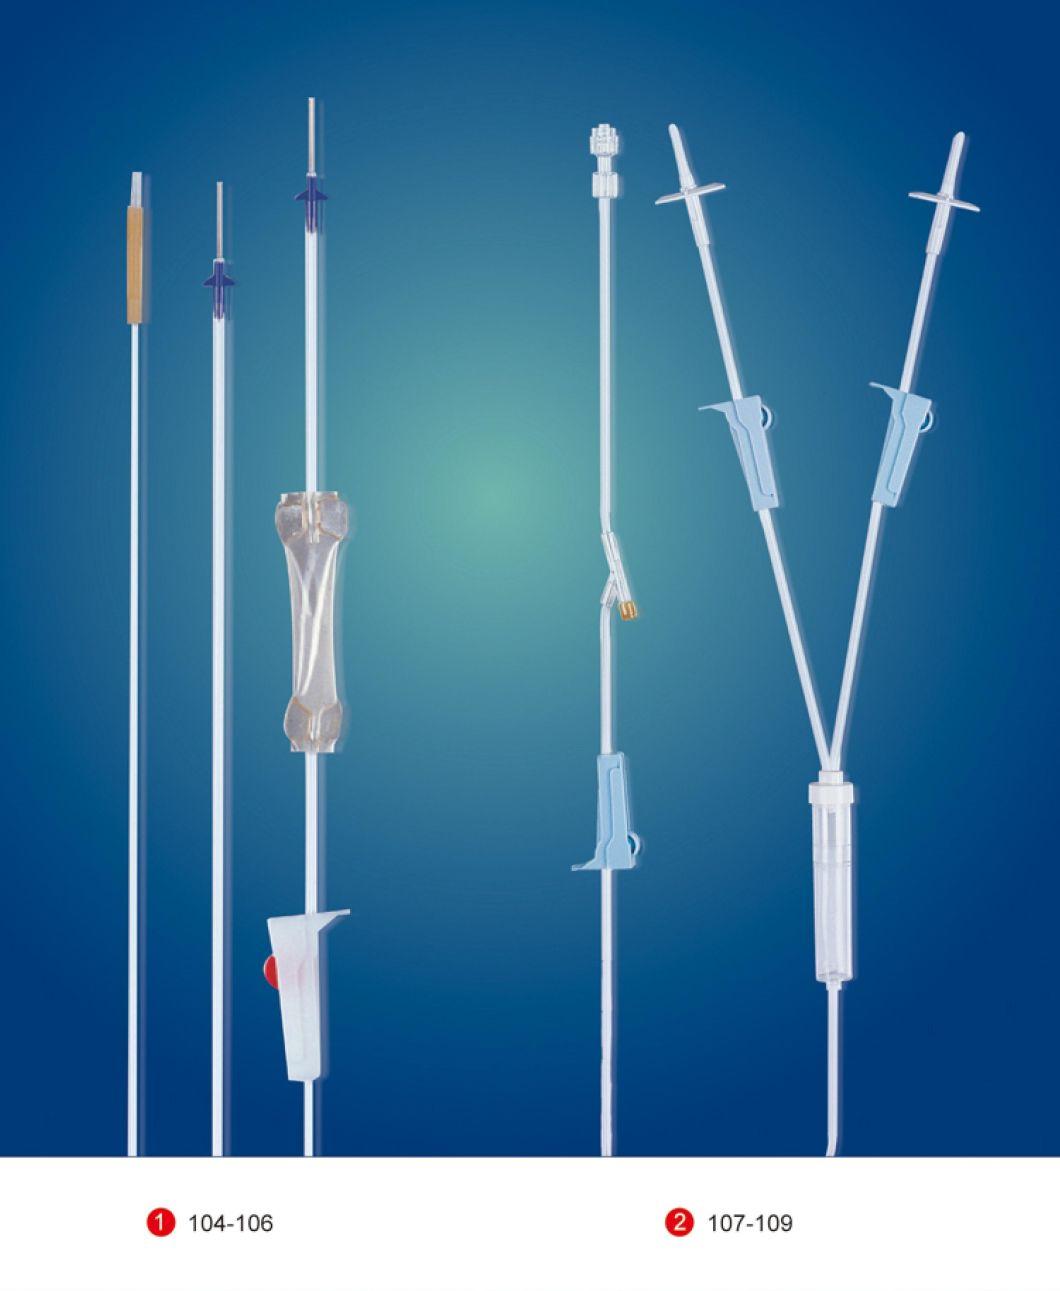 Medical Disposable Blood Transfusion Set, High-Quality Sterile, IV/Giving Set Drip Chamber with Filter, with/Without Needle